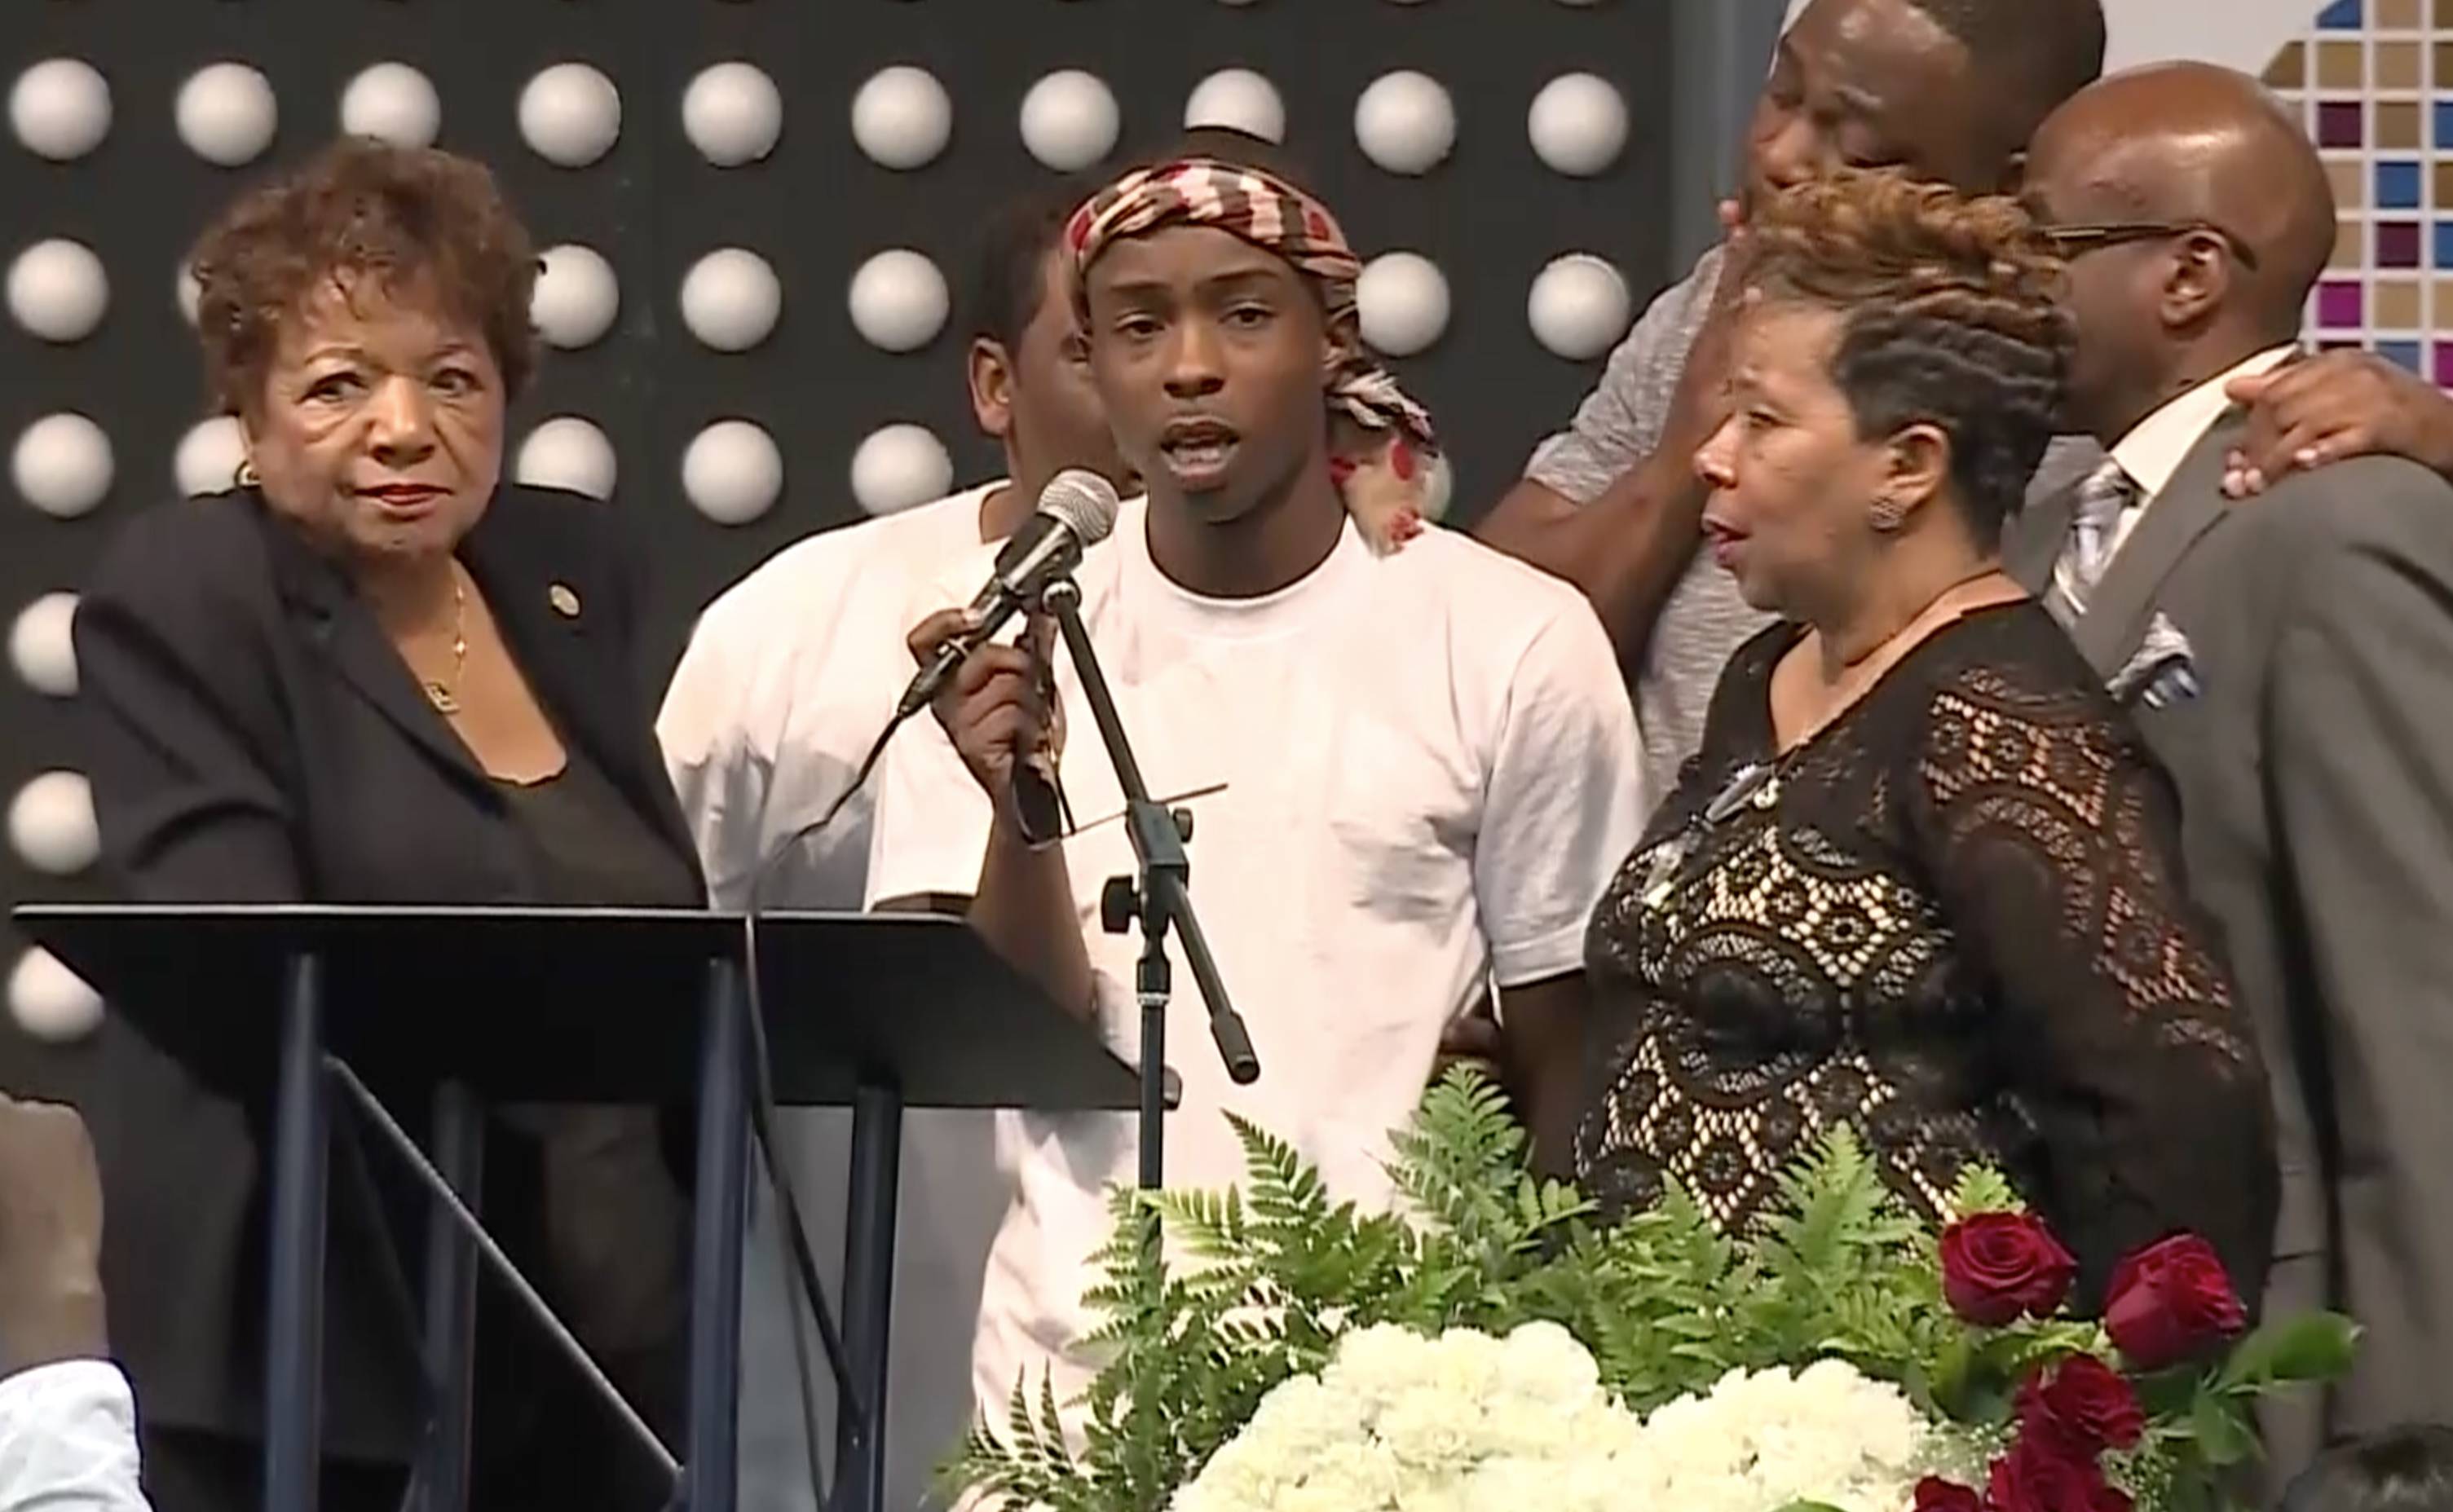 Stevante Clarks gives rousing speech at funeral on BET News.